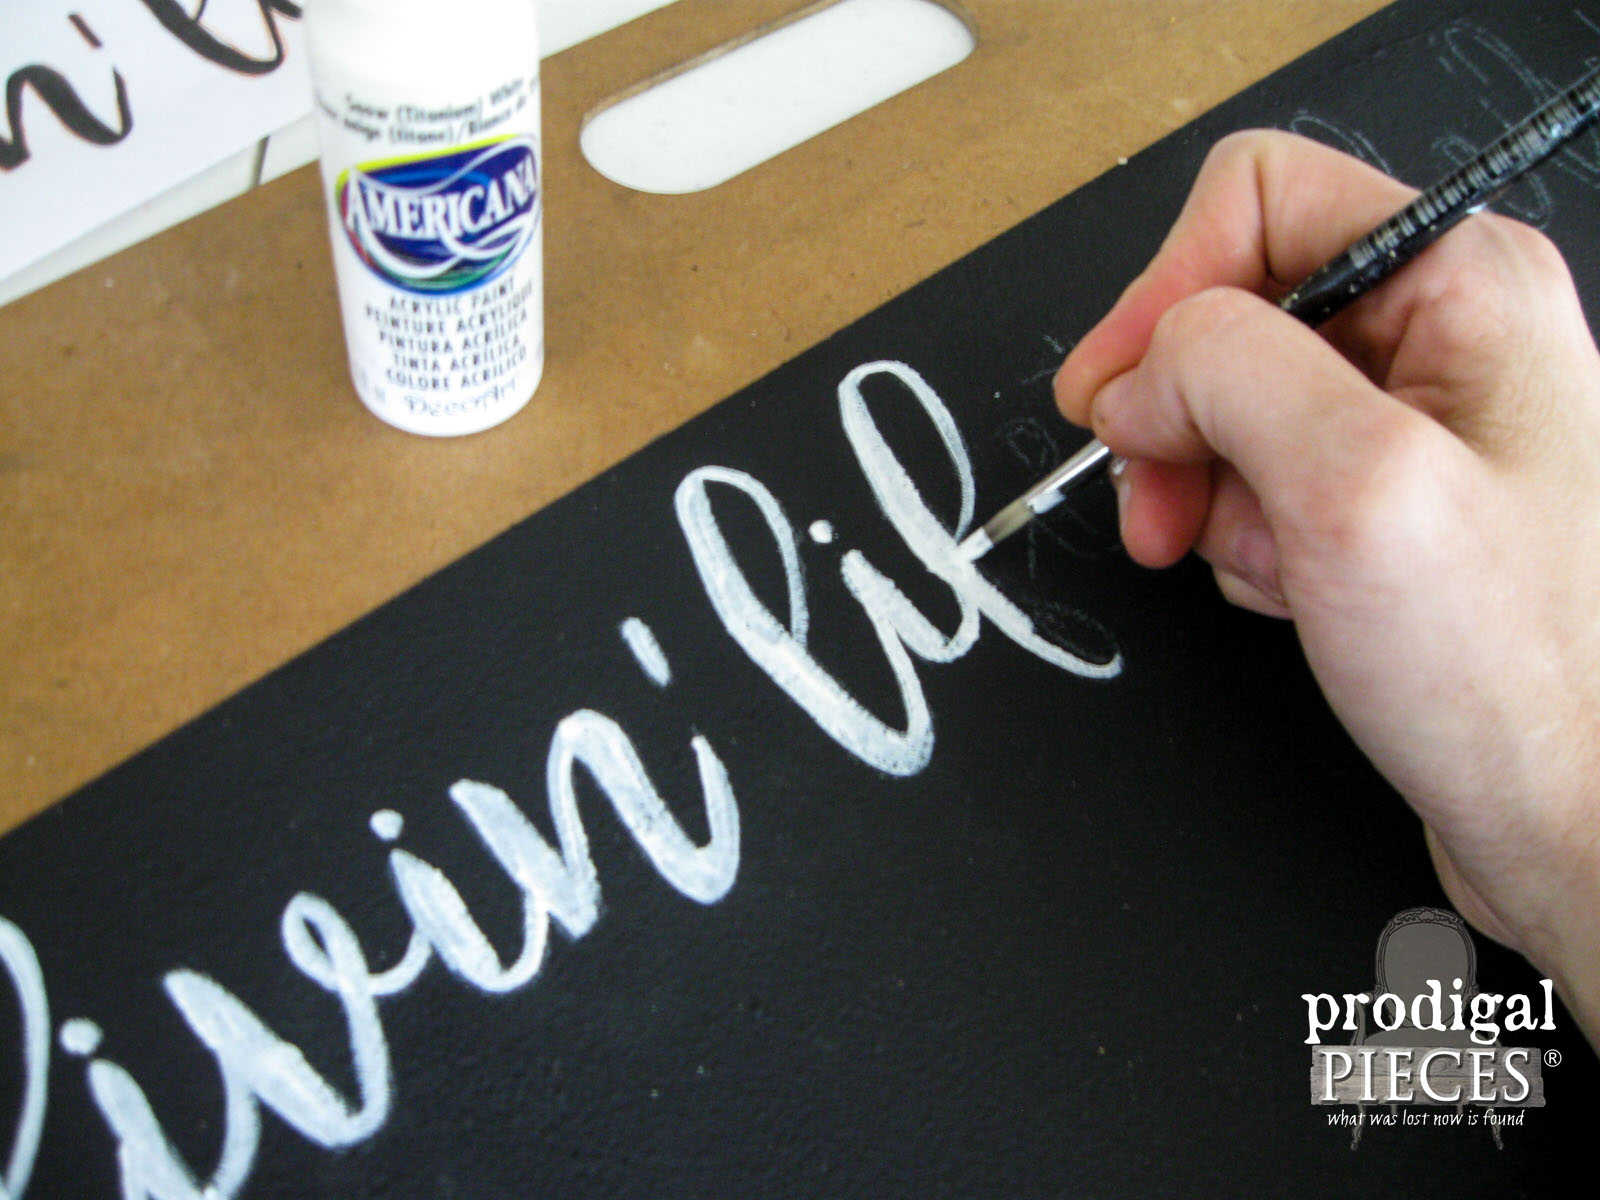 Hand-painting Text on Magnetic Message Board | Prodigal Pieces | prodigalpieces.com